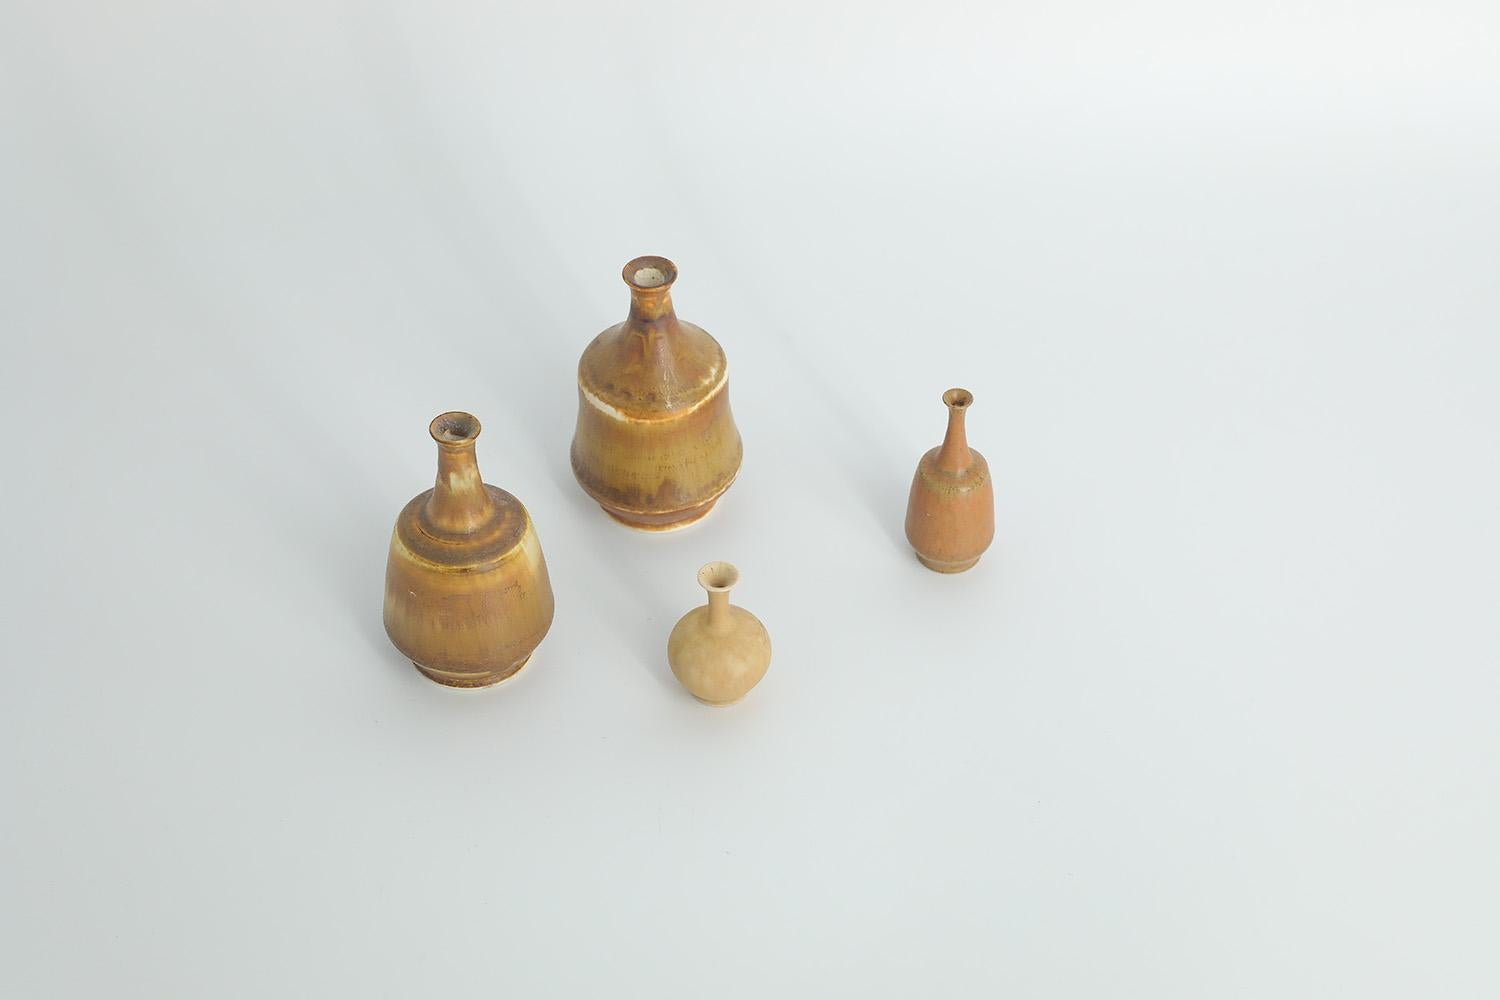 1. Height 8 cm  Width 5 cm  Depth 5 cm
2. Height 7.5 cm  Width 5 cm  Depth 5 cm
3. Height 6 cm  Width 2.5 cm  Depth 2.5 cm
4. Height 4 cm  Width 3 cm  Depth 3 cm

This set of 4 miniature vases was designed by Gunnar Borg for the Swedish manufacture